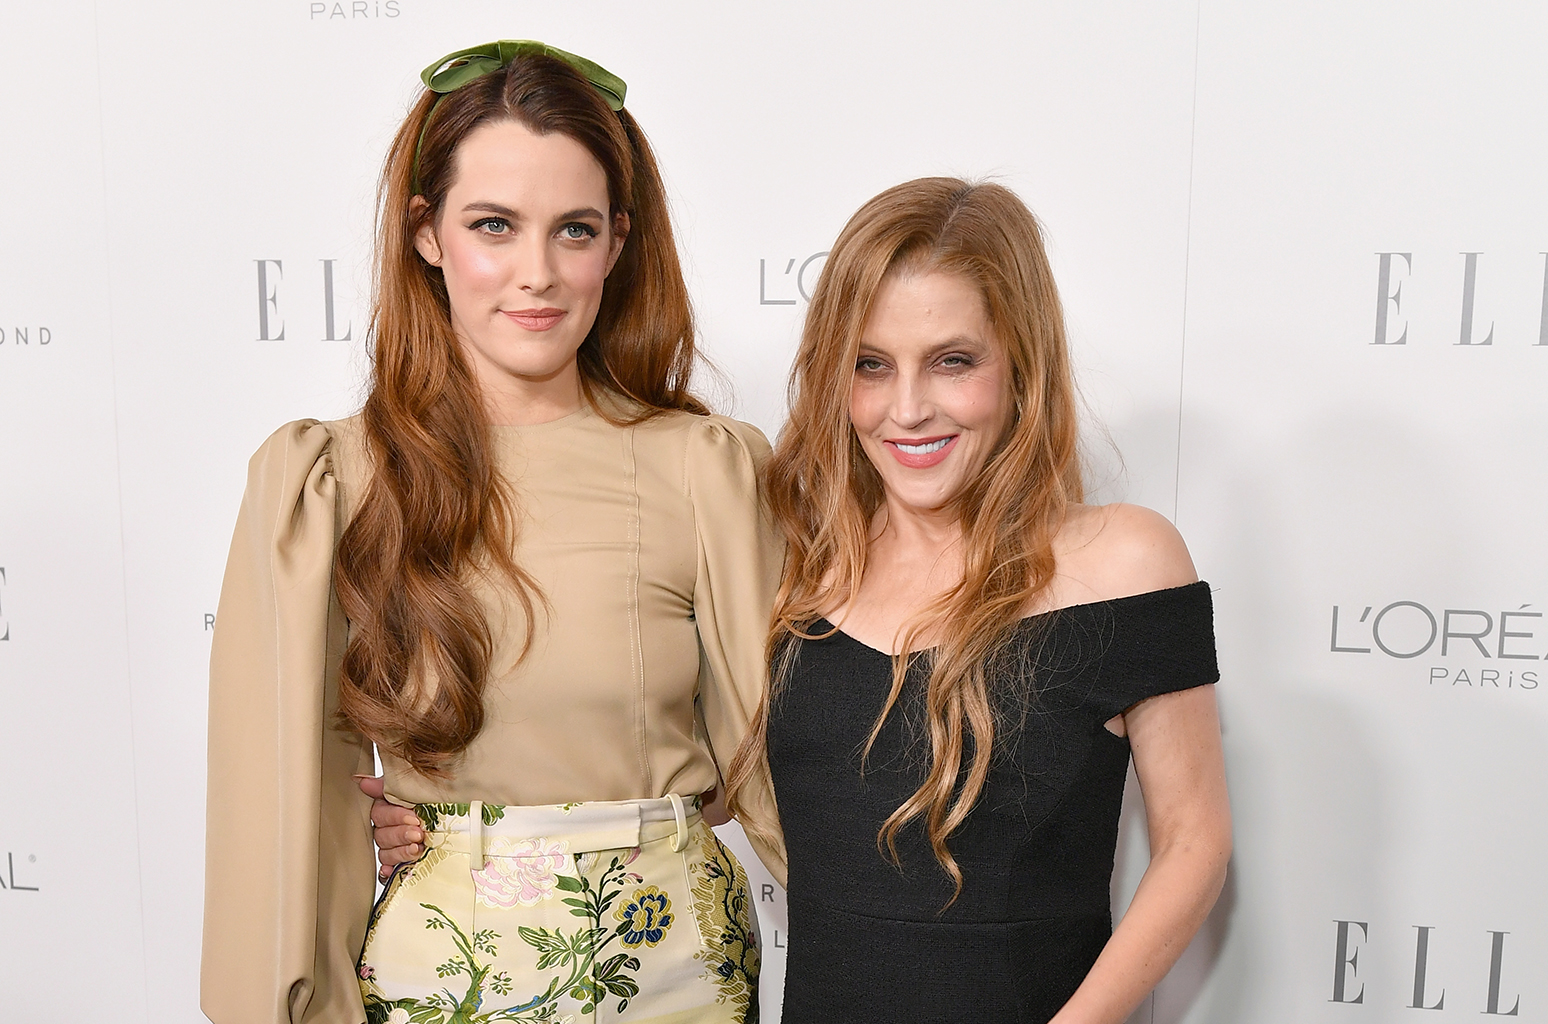 riley keough ‘grateful’ to have one last photo with late mom lisa marie presley